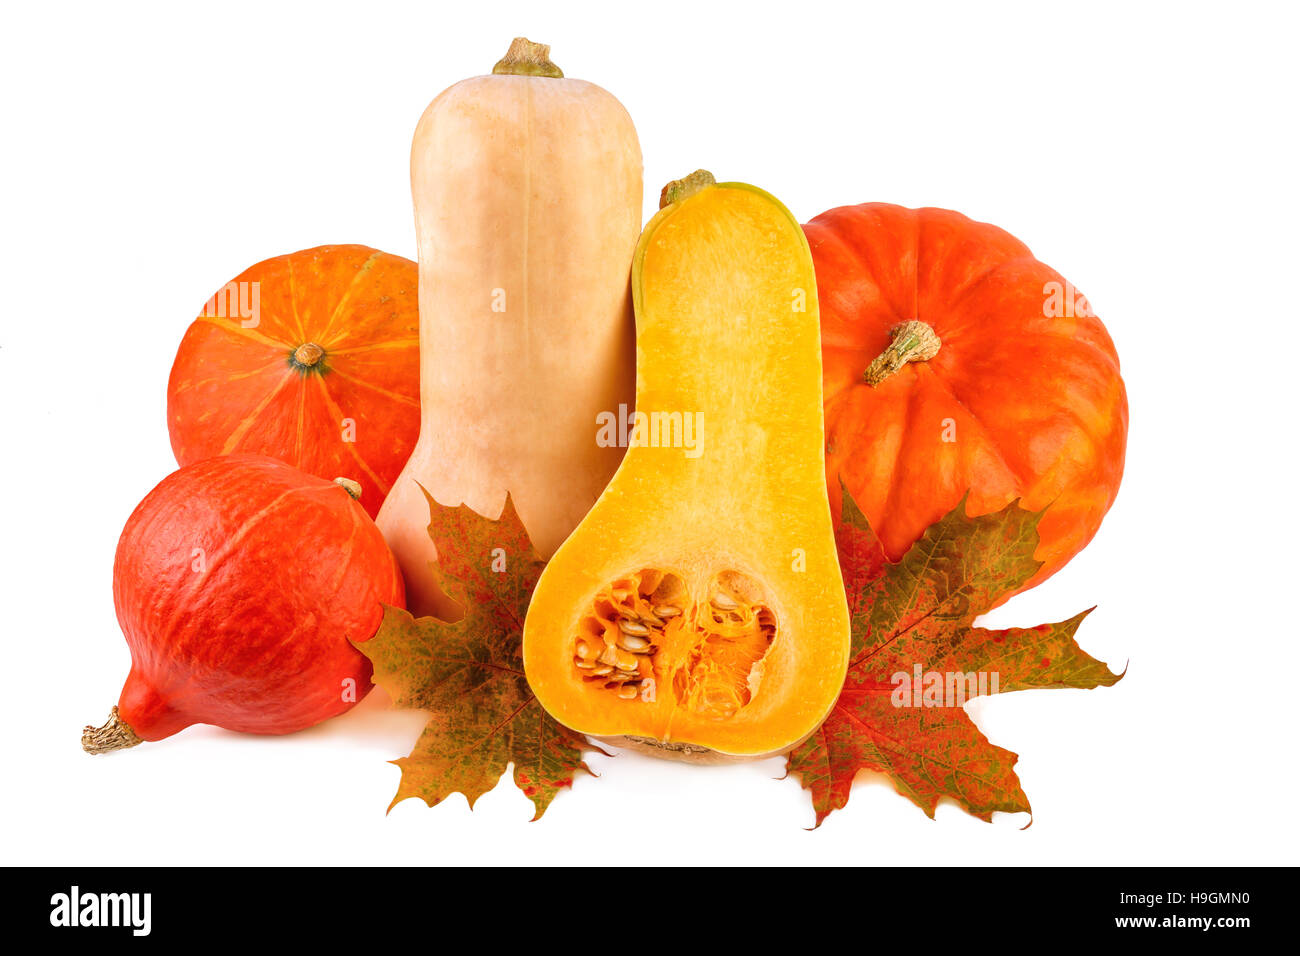 Pumpkin with fall leaves on white. Various of orange pumpkins isolated on white background. Stock Photo